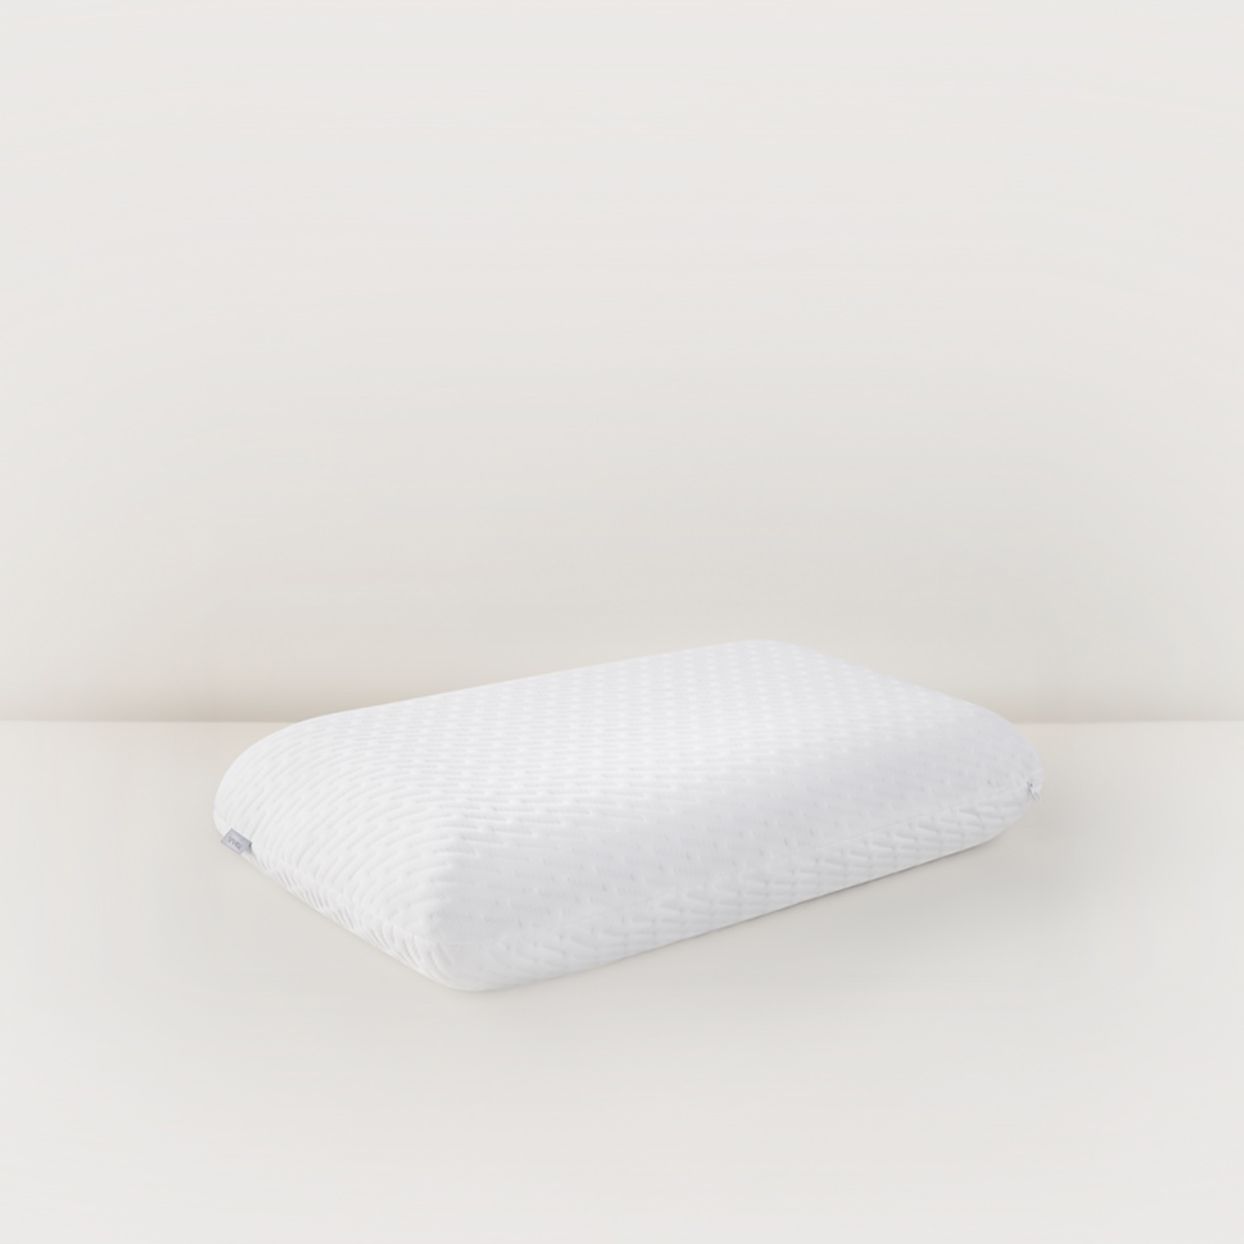 white pillow with textured cover